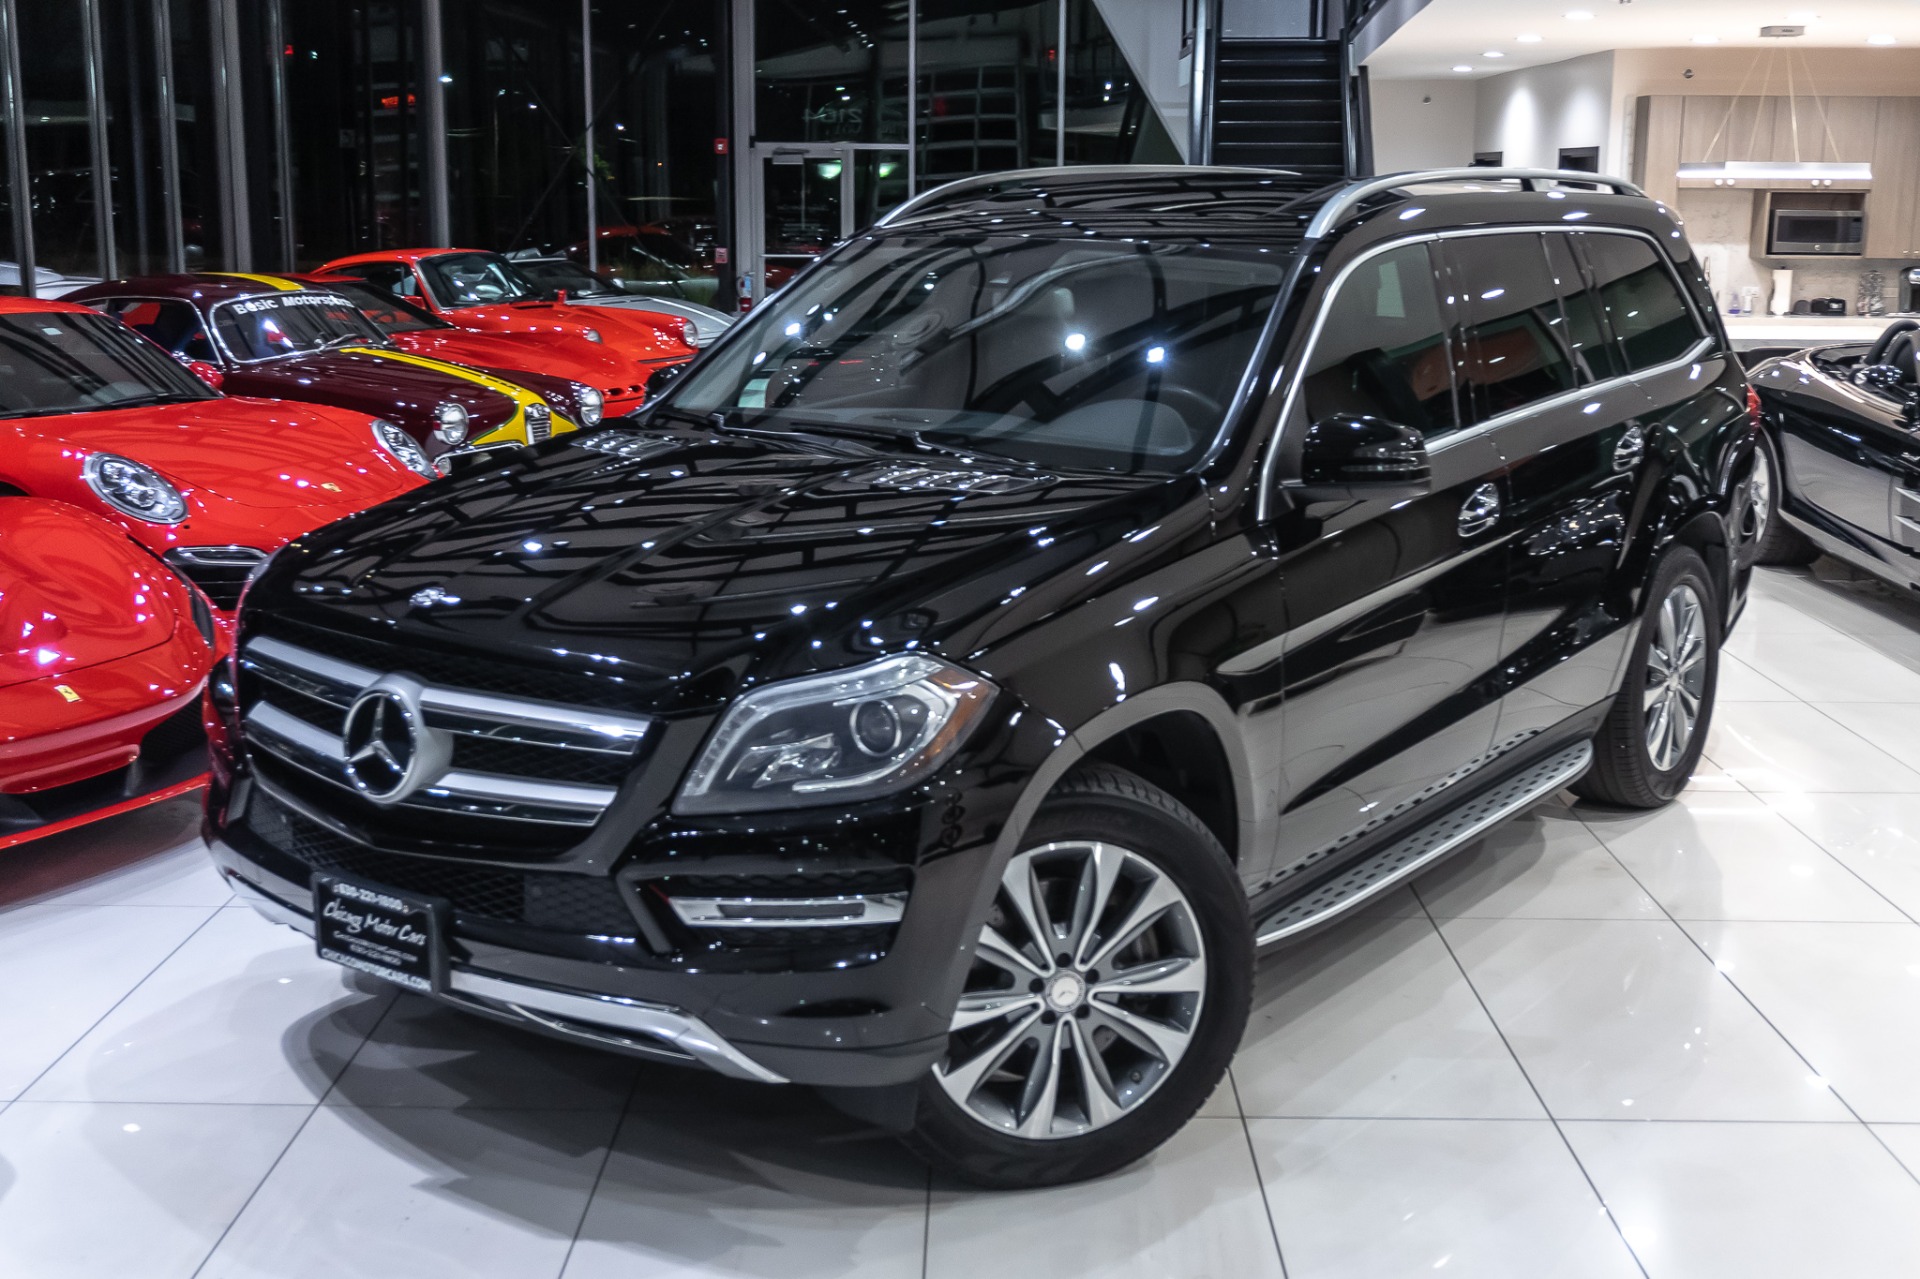 Used-2014-Mercedes-Benz-GL450-4MATIC-SUV-79k-MSRP-REAR-ENTERTAINMENT-LOADED